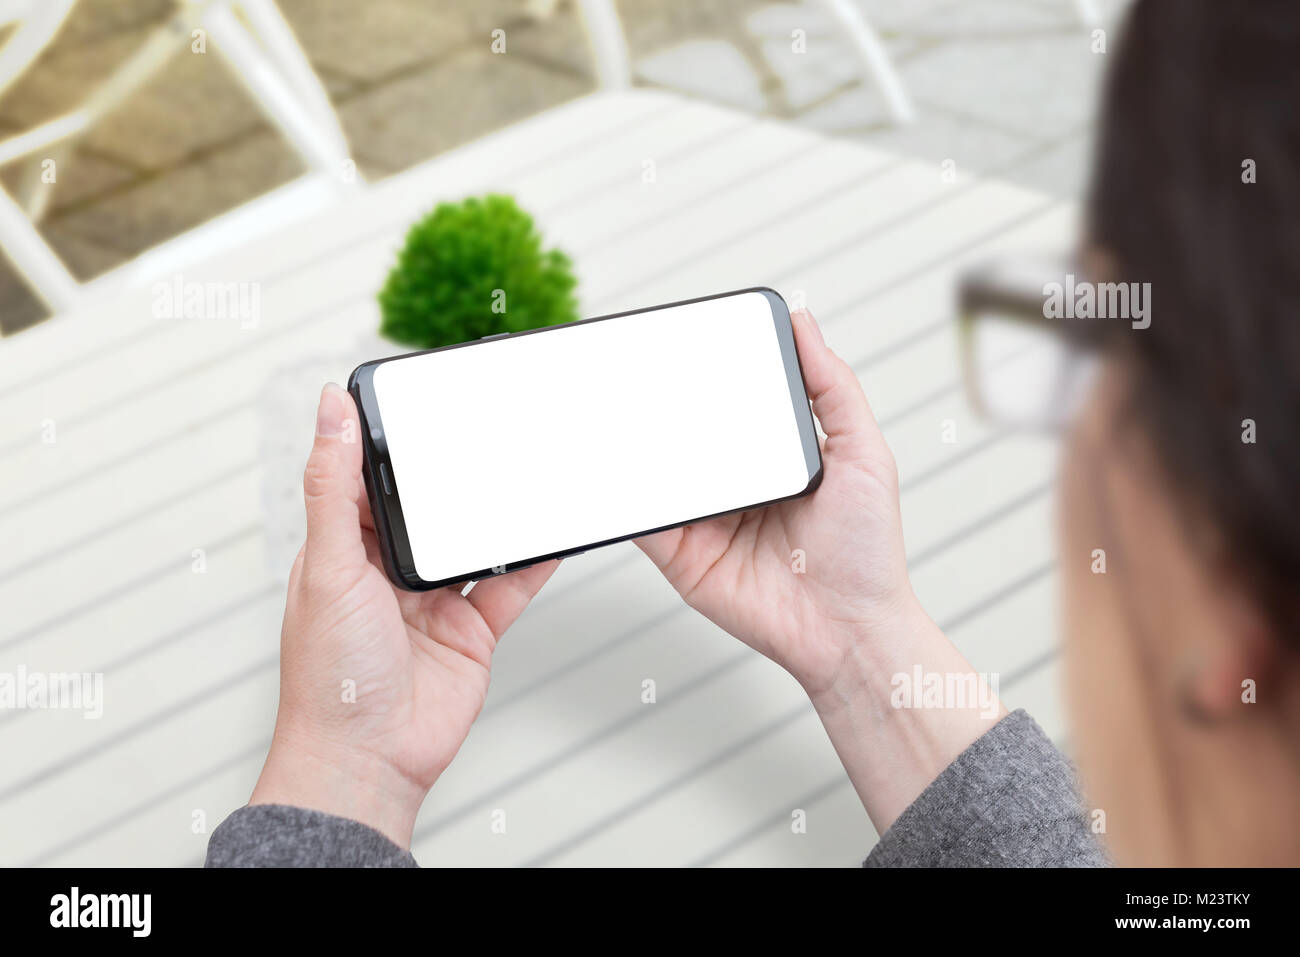 Woman holding smart phone in horizontal position. Isolated screen for mockup. White wooden desk and plant in background. Stock Photo